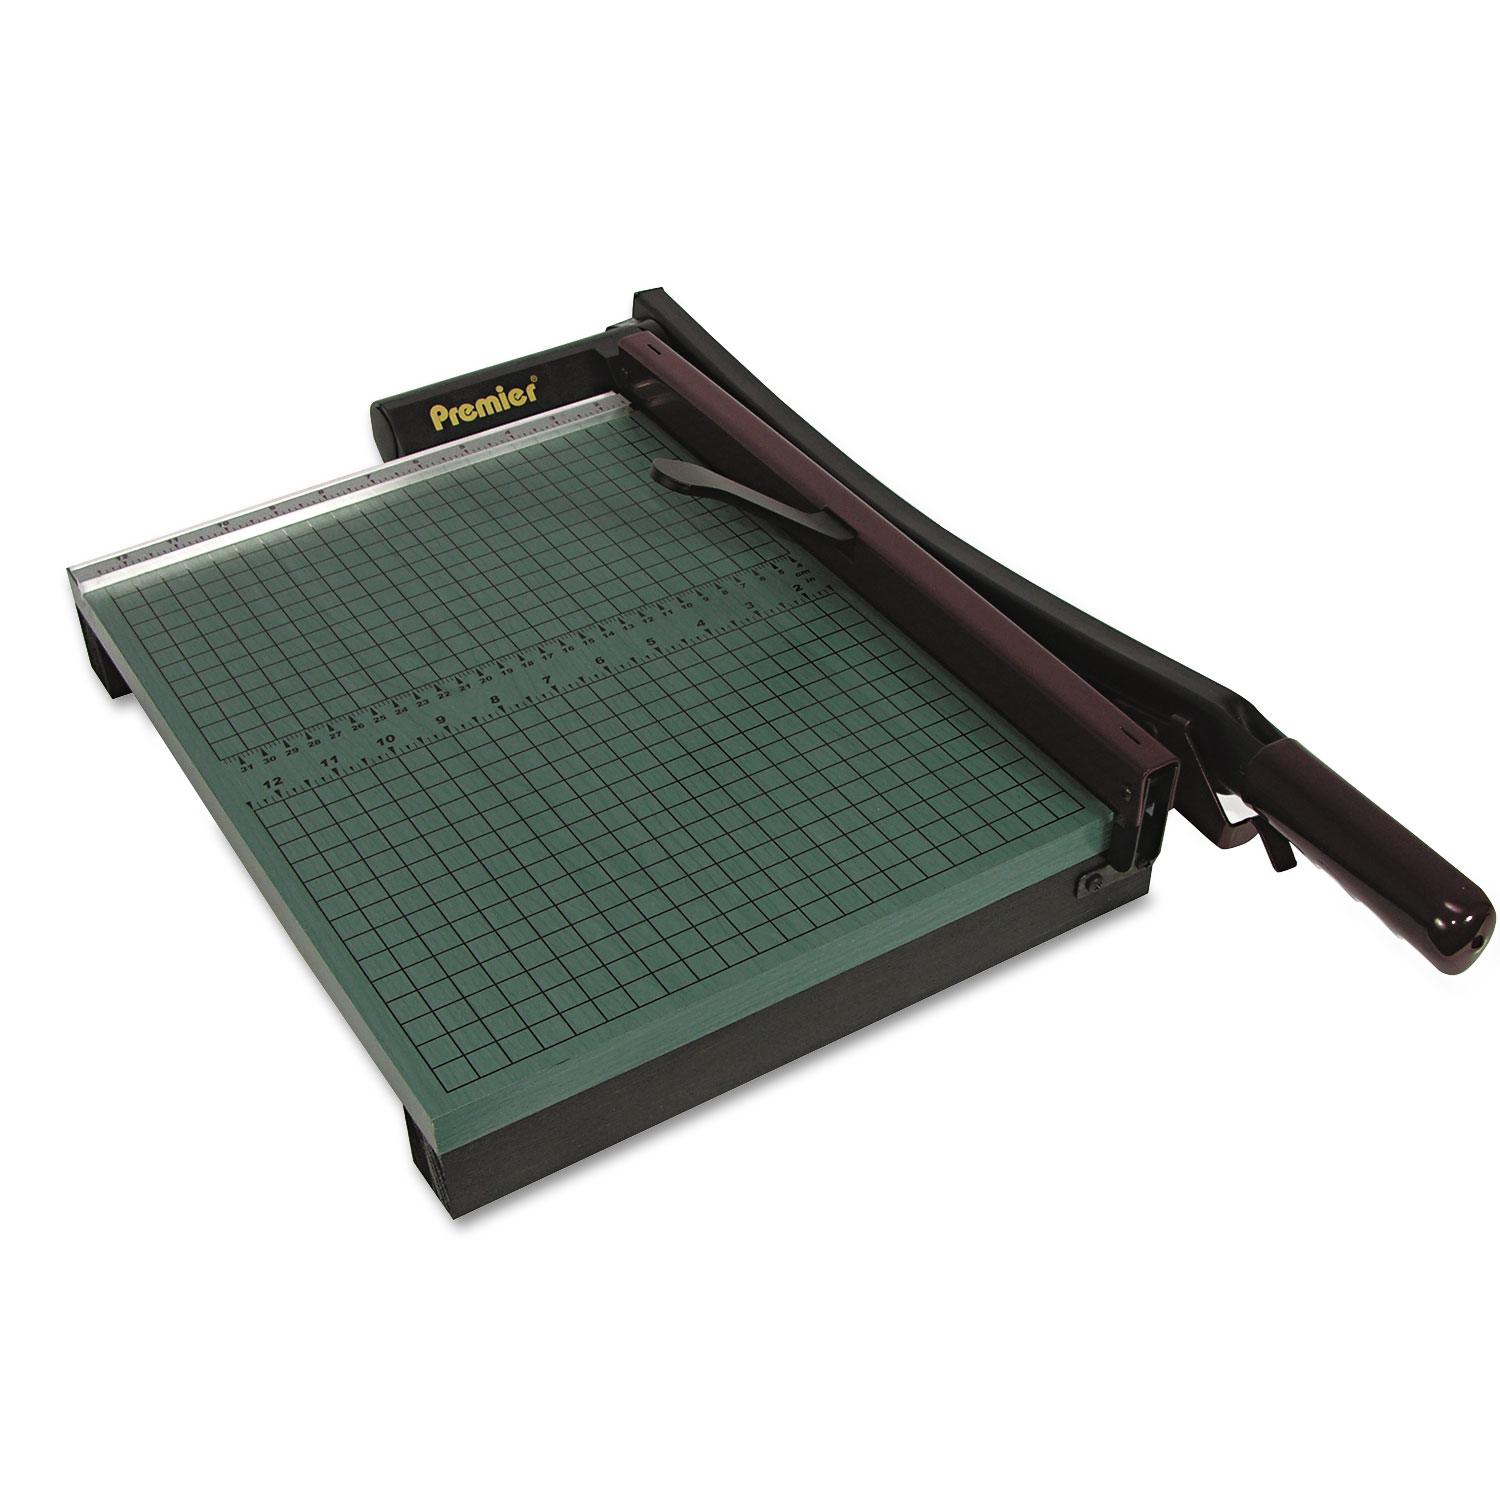 StakCut Paper Trimmer, 30 Sheets, Wood Base, 12 7/8 x 17-1/2